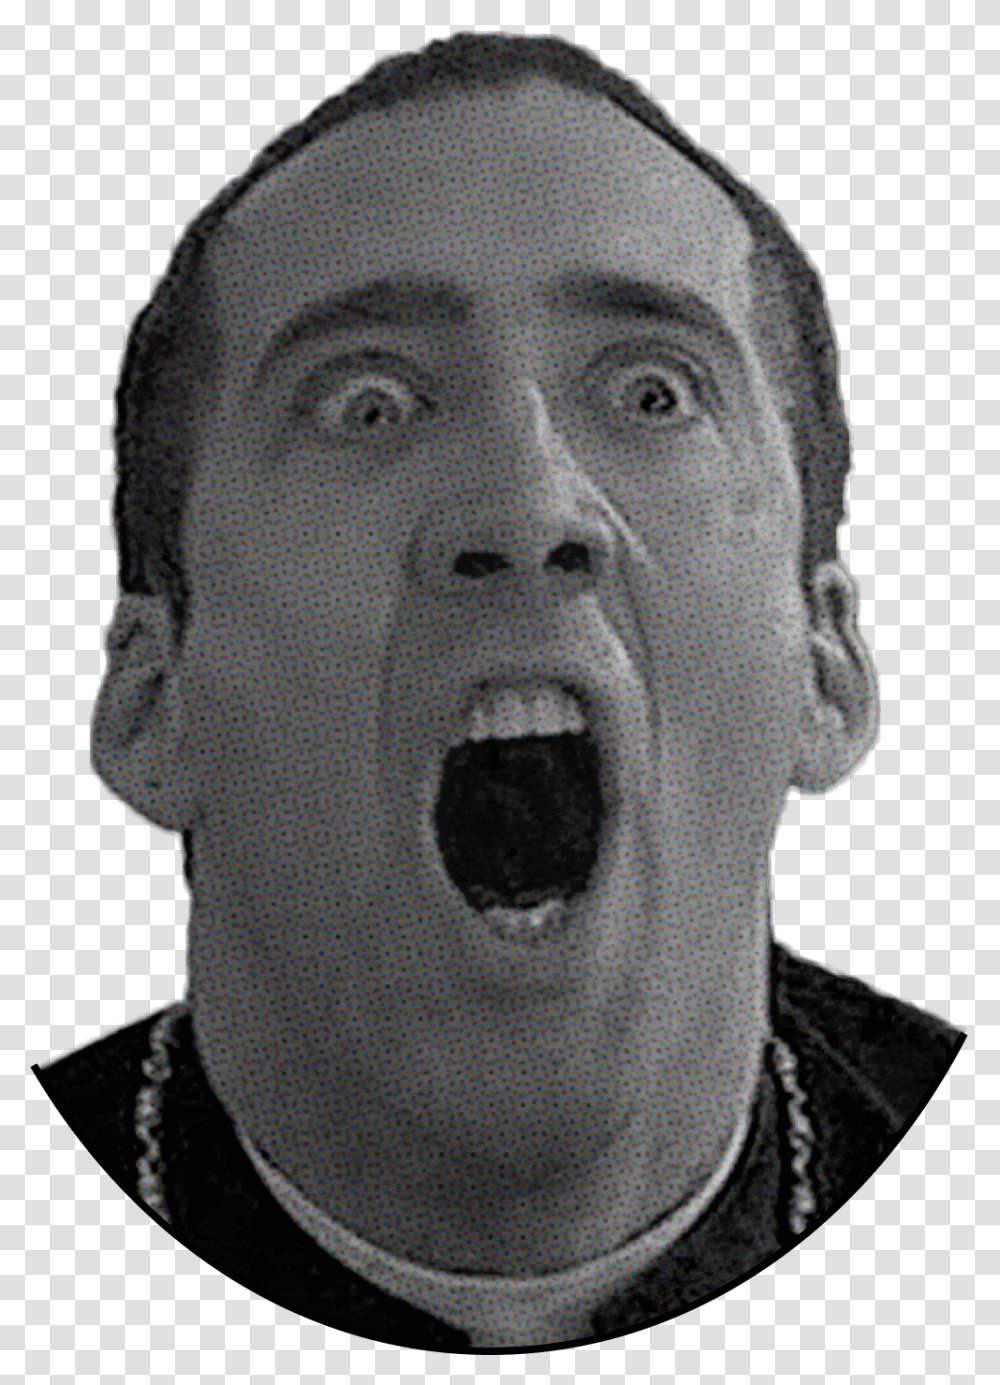 Nicolas Cage Face, Jaw, Head, Teeth, Mouth Transparent Png